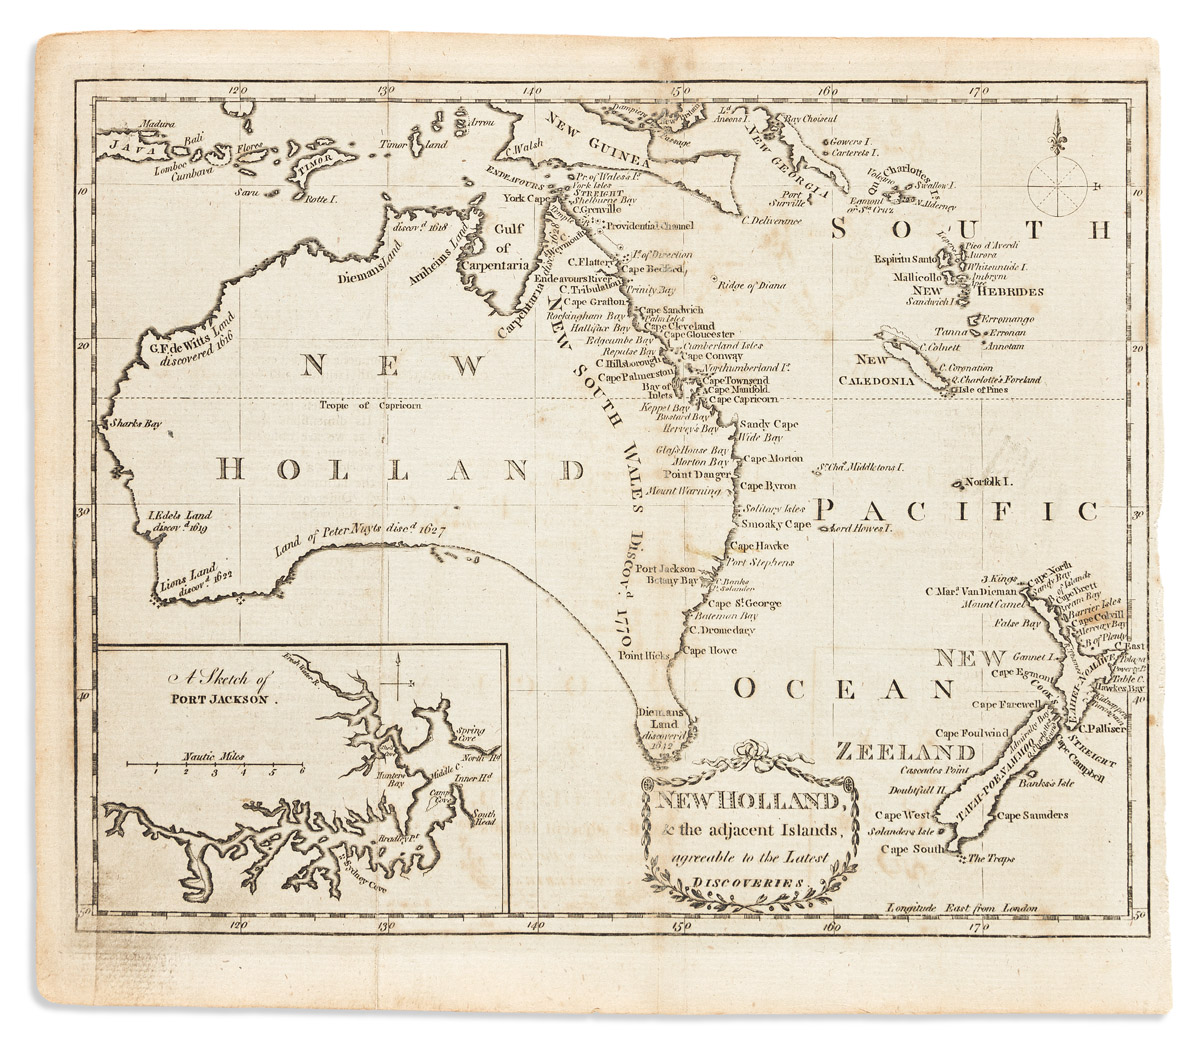 (AUSTRALIA.) Alexander Kincaid. New Holland & the Adjacent Islands, Agreeable to the Latest Discoveries.